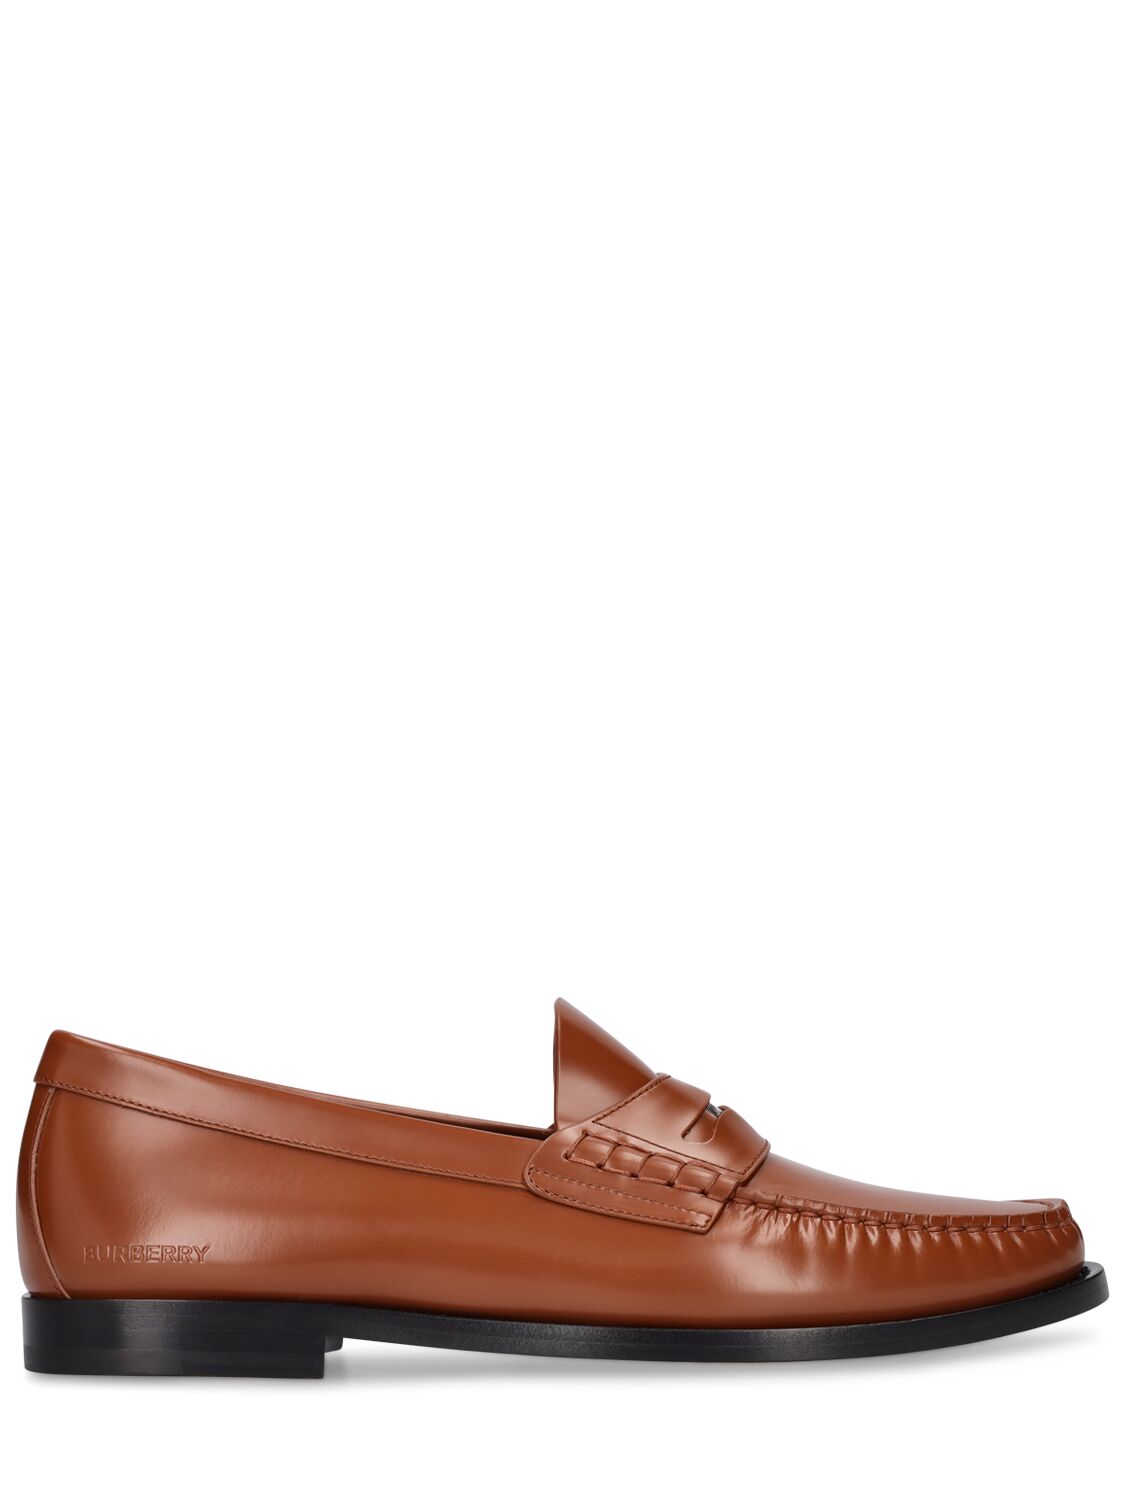 BURBERRY RUPERT GRAIN LEATHER LOAFERS